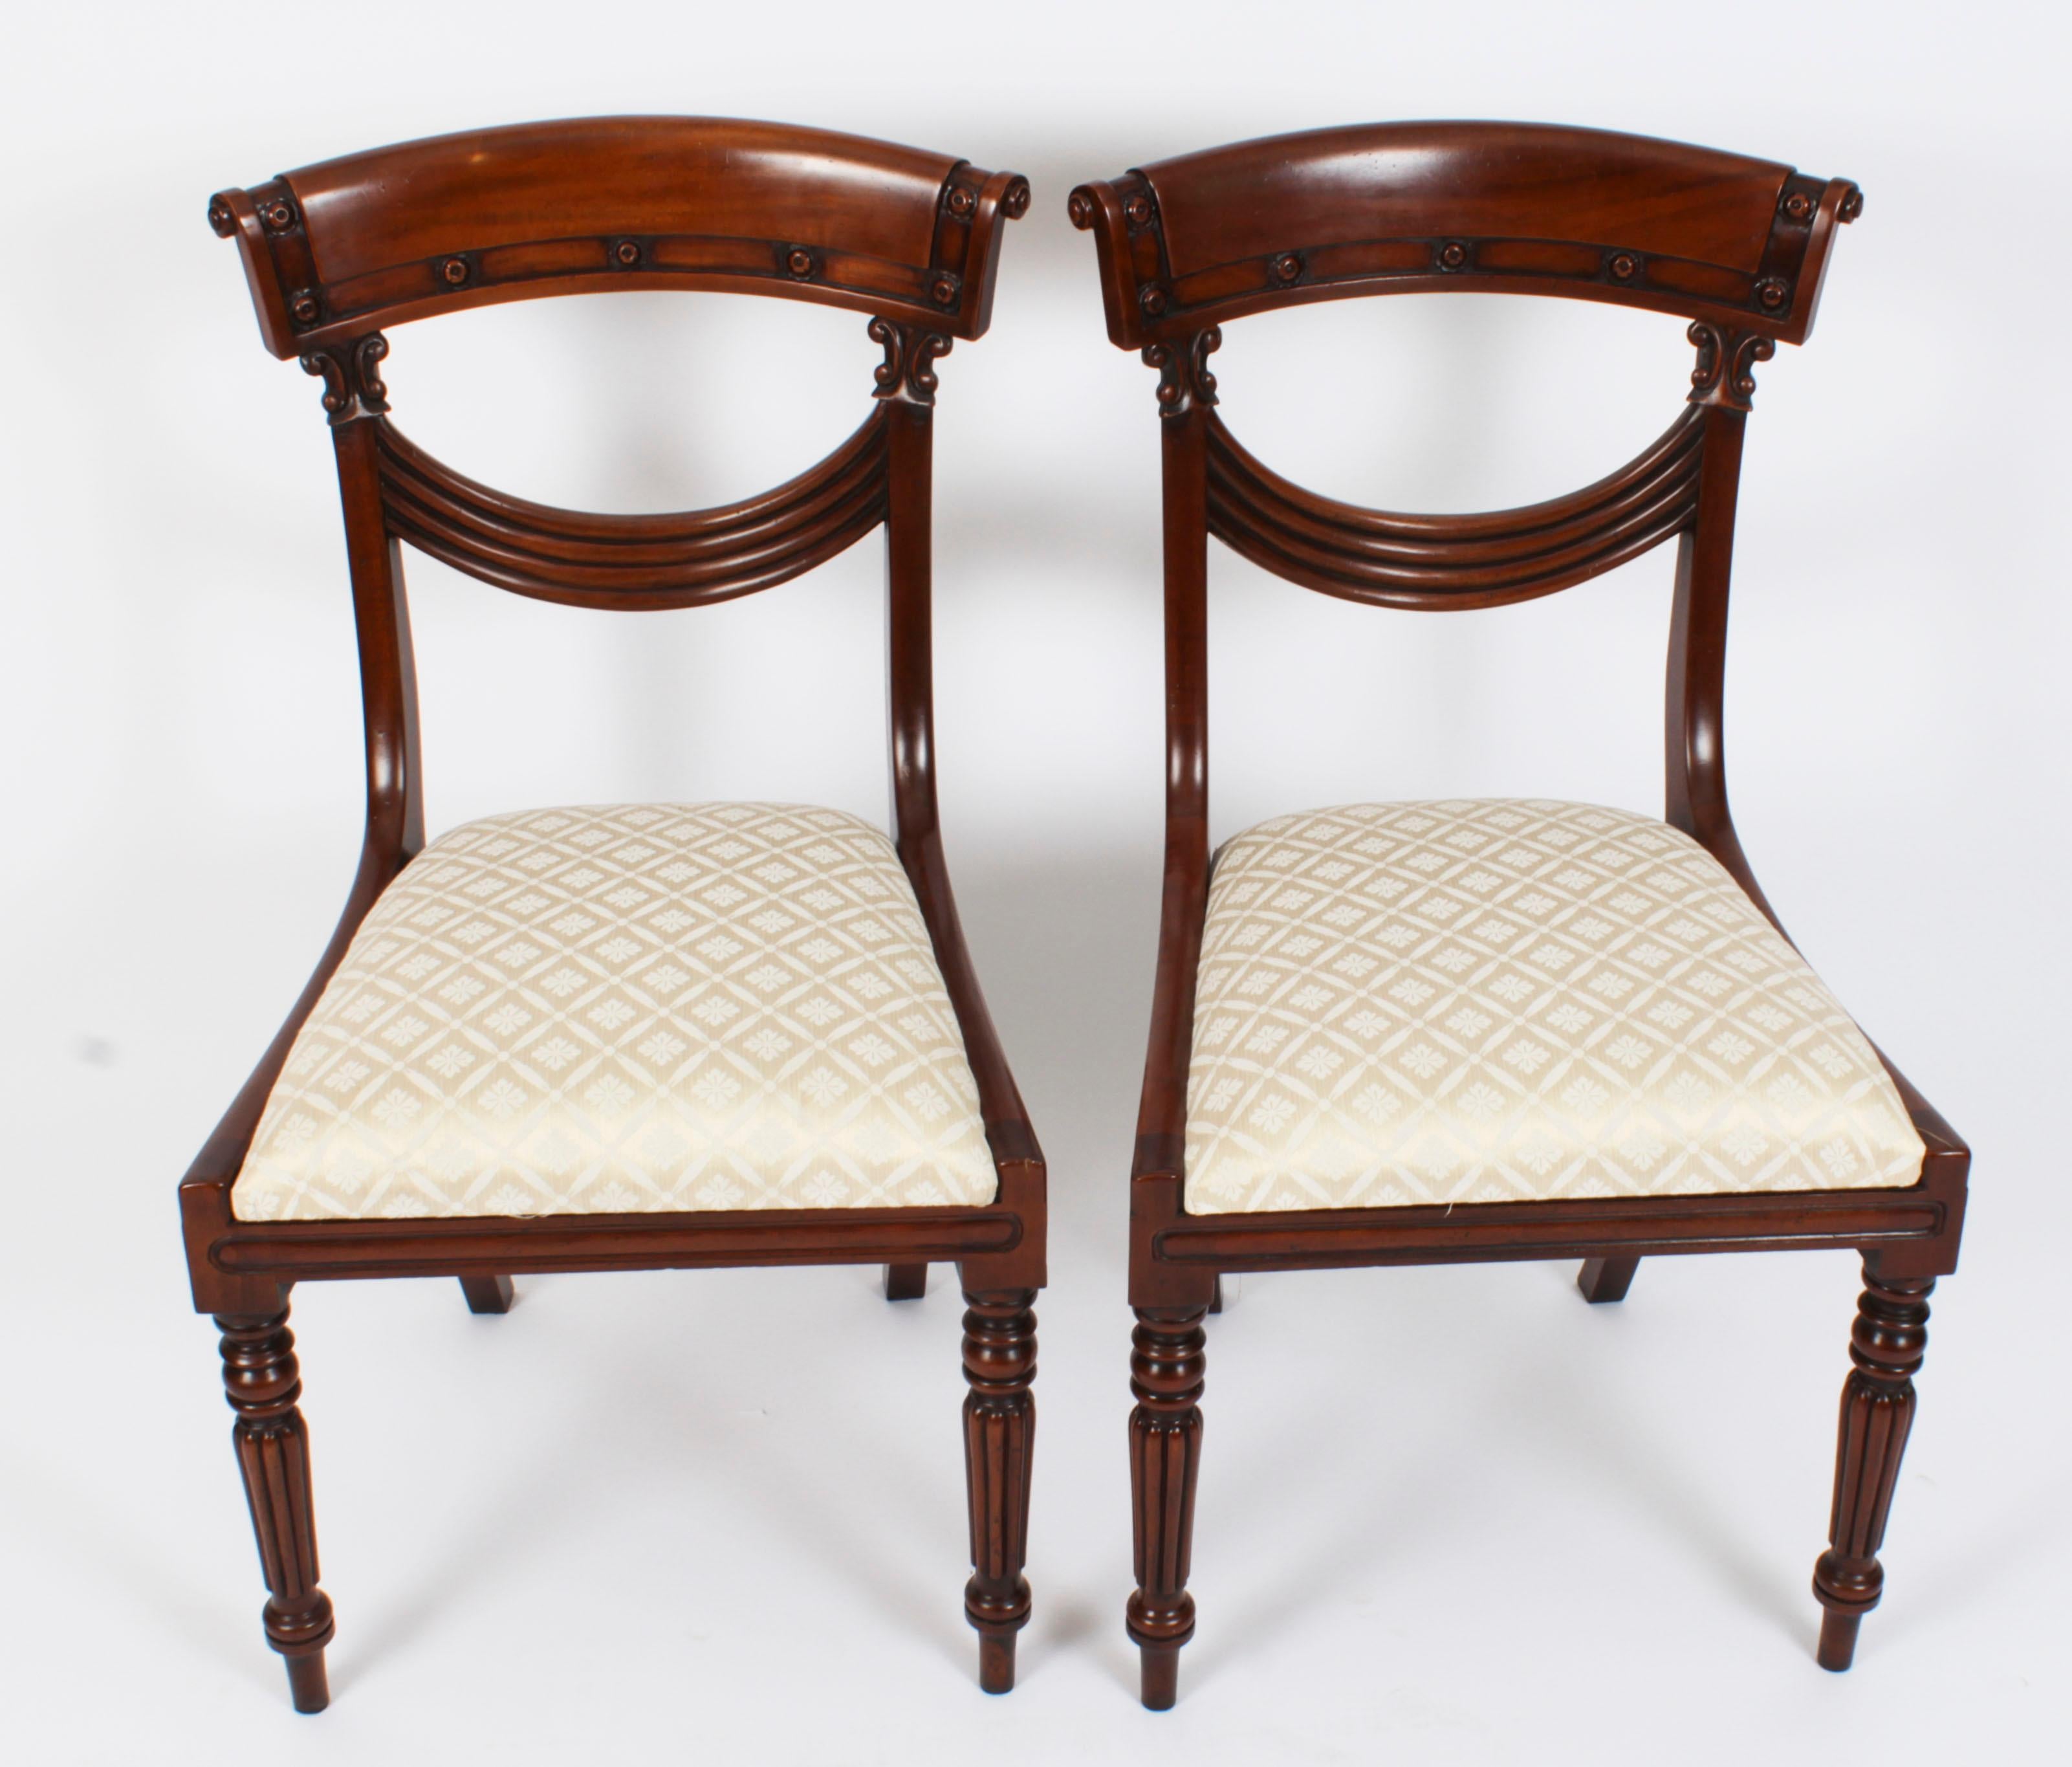 Vintage Pair Regency Revival Swag Back Chairs Desk Chairs 20th Century 9